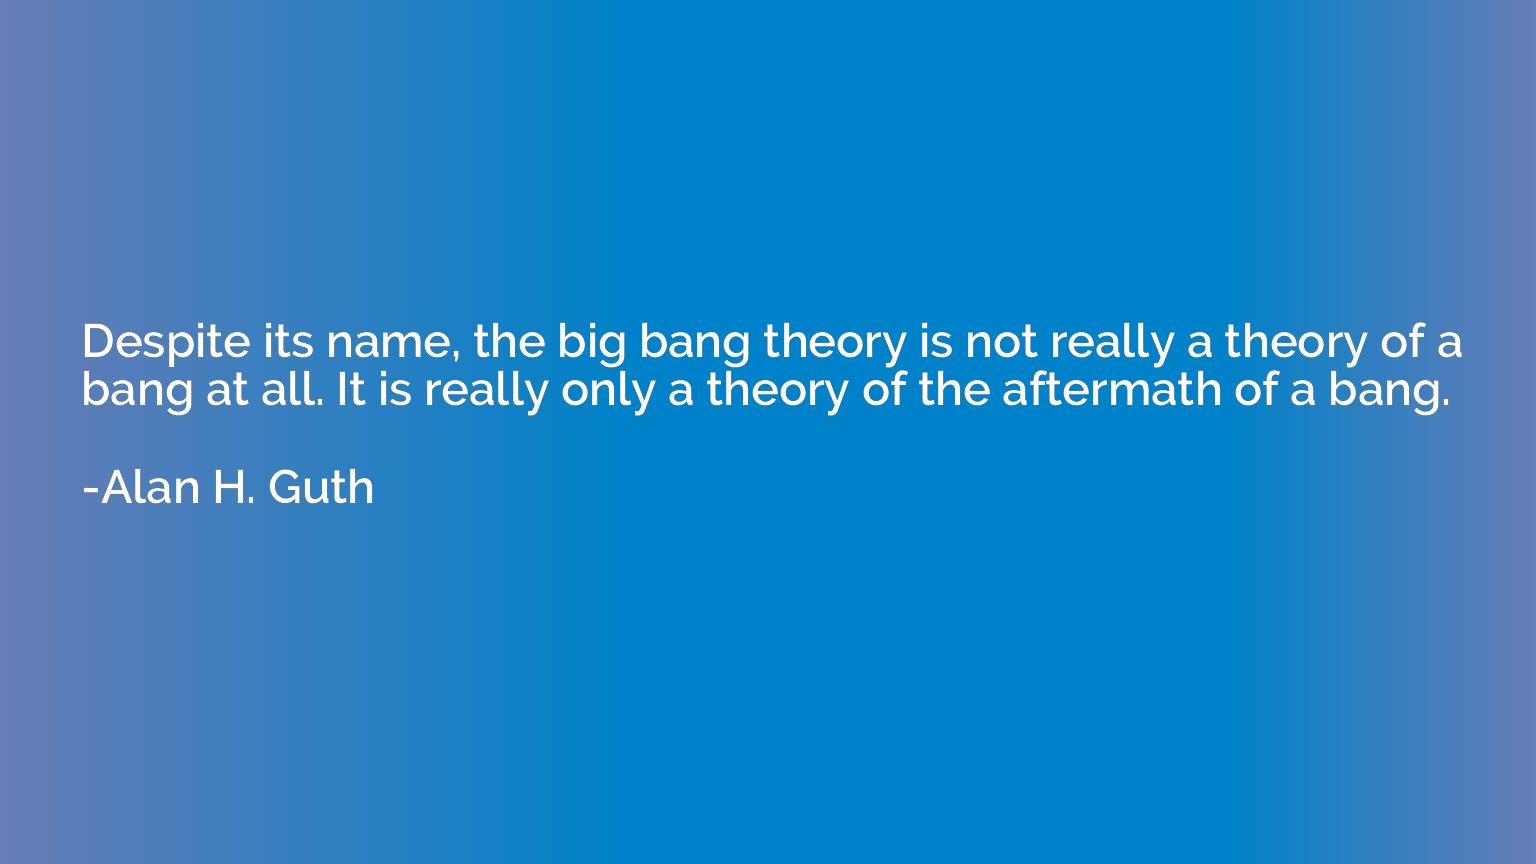 Despite its name, the big bang theory is not really a theory